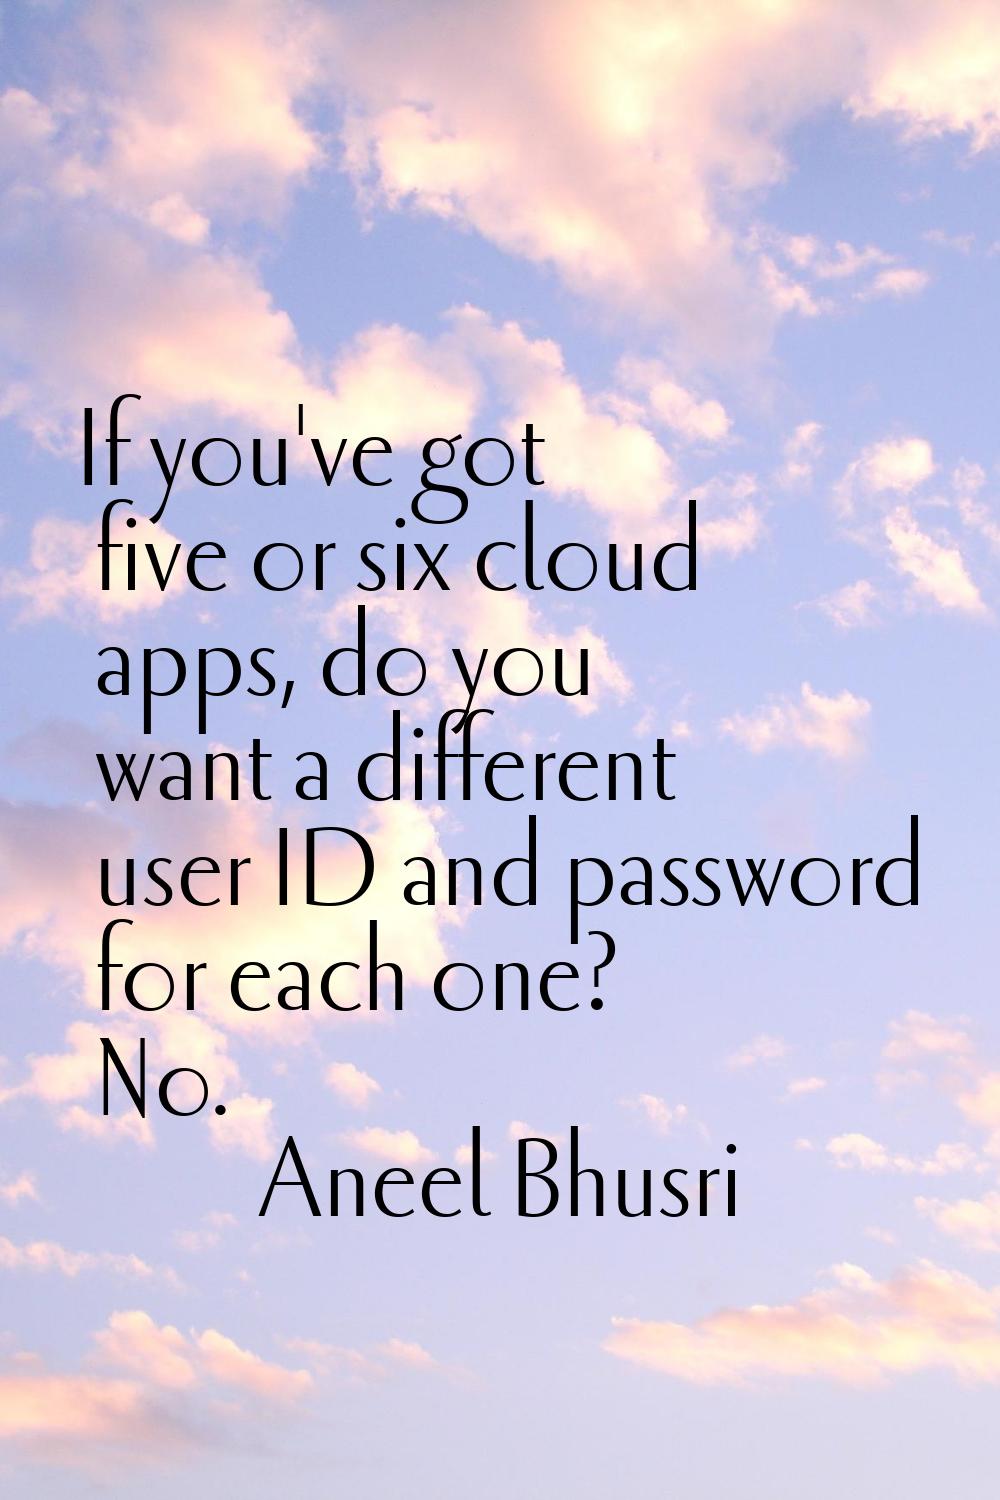 If you've got five or six cloud apps, do you want a different user ID and password for each one? No